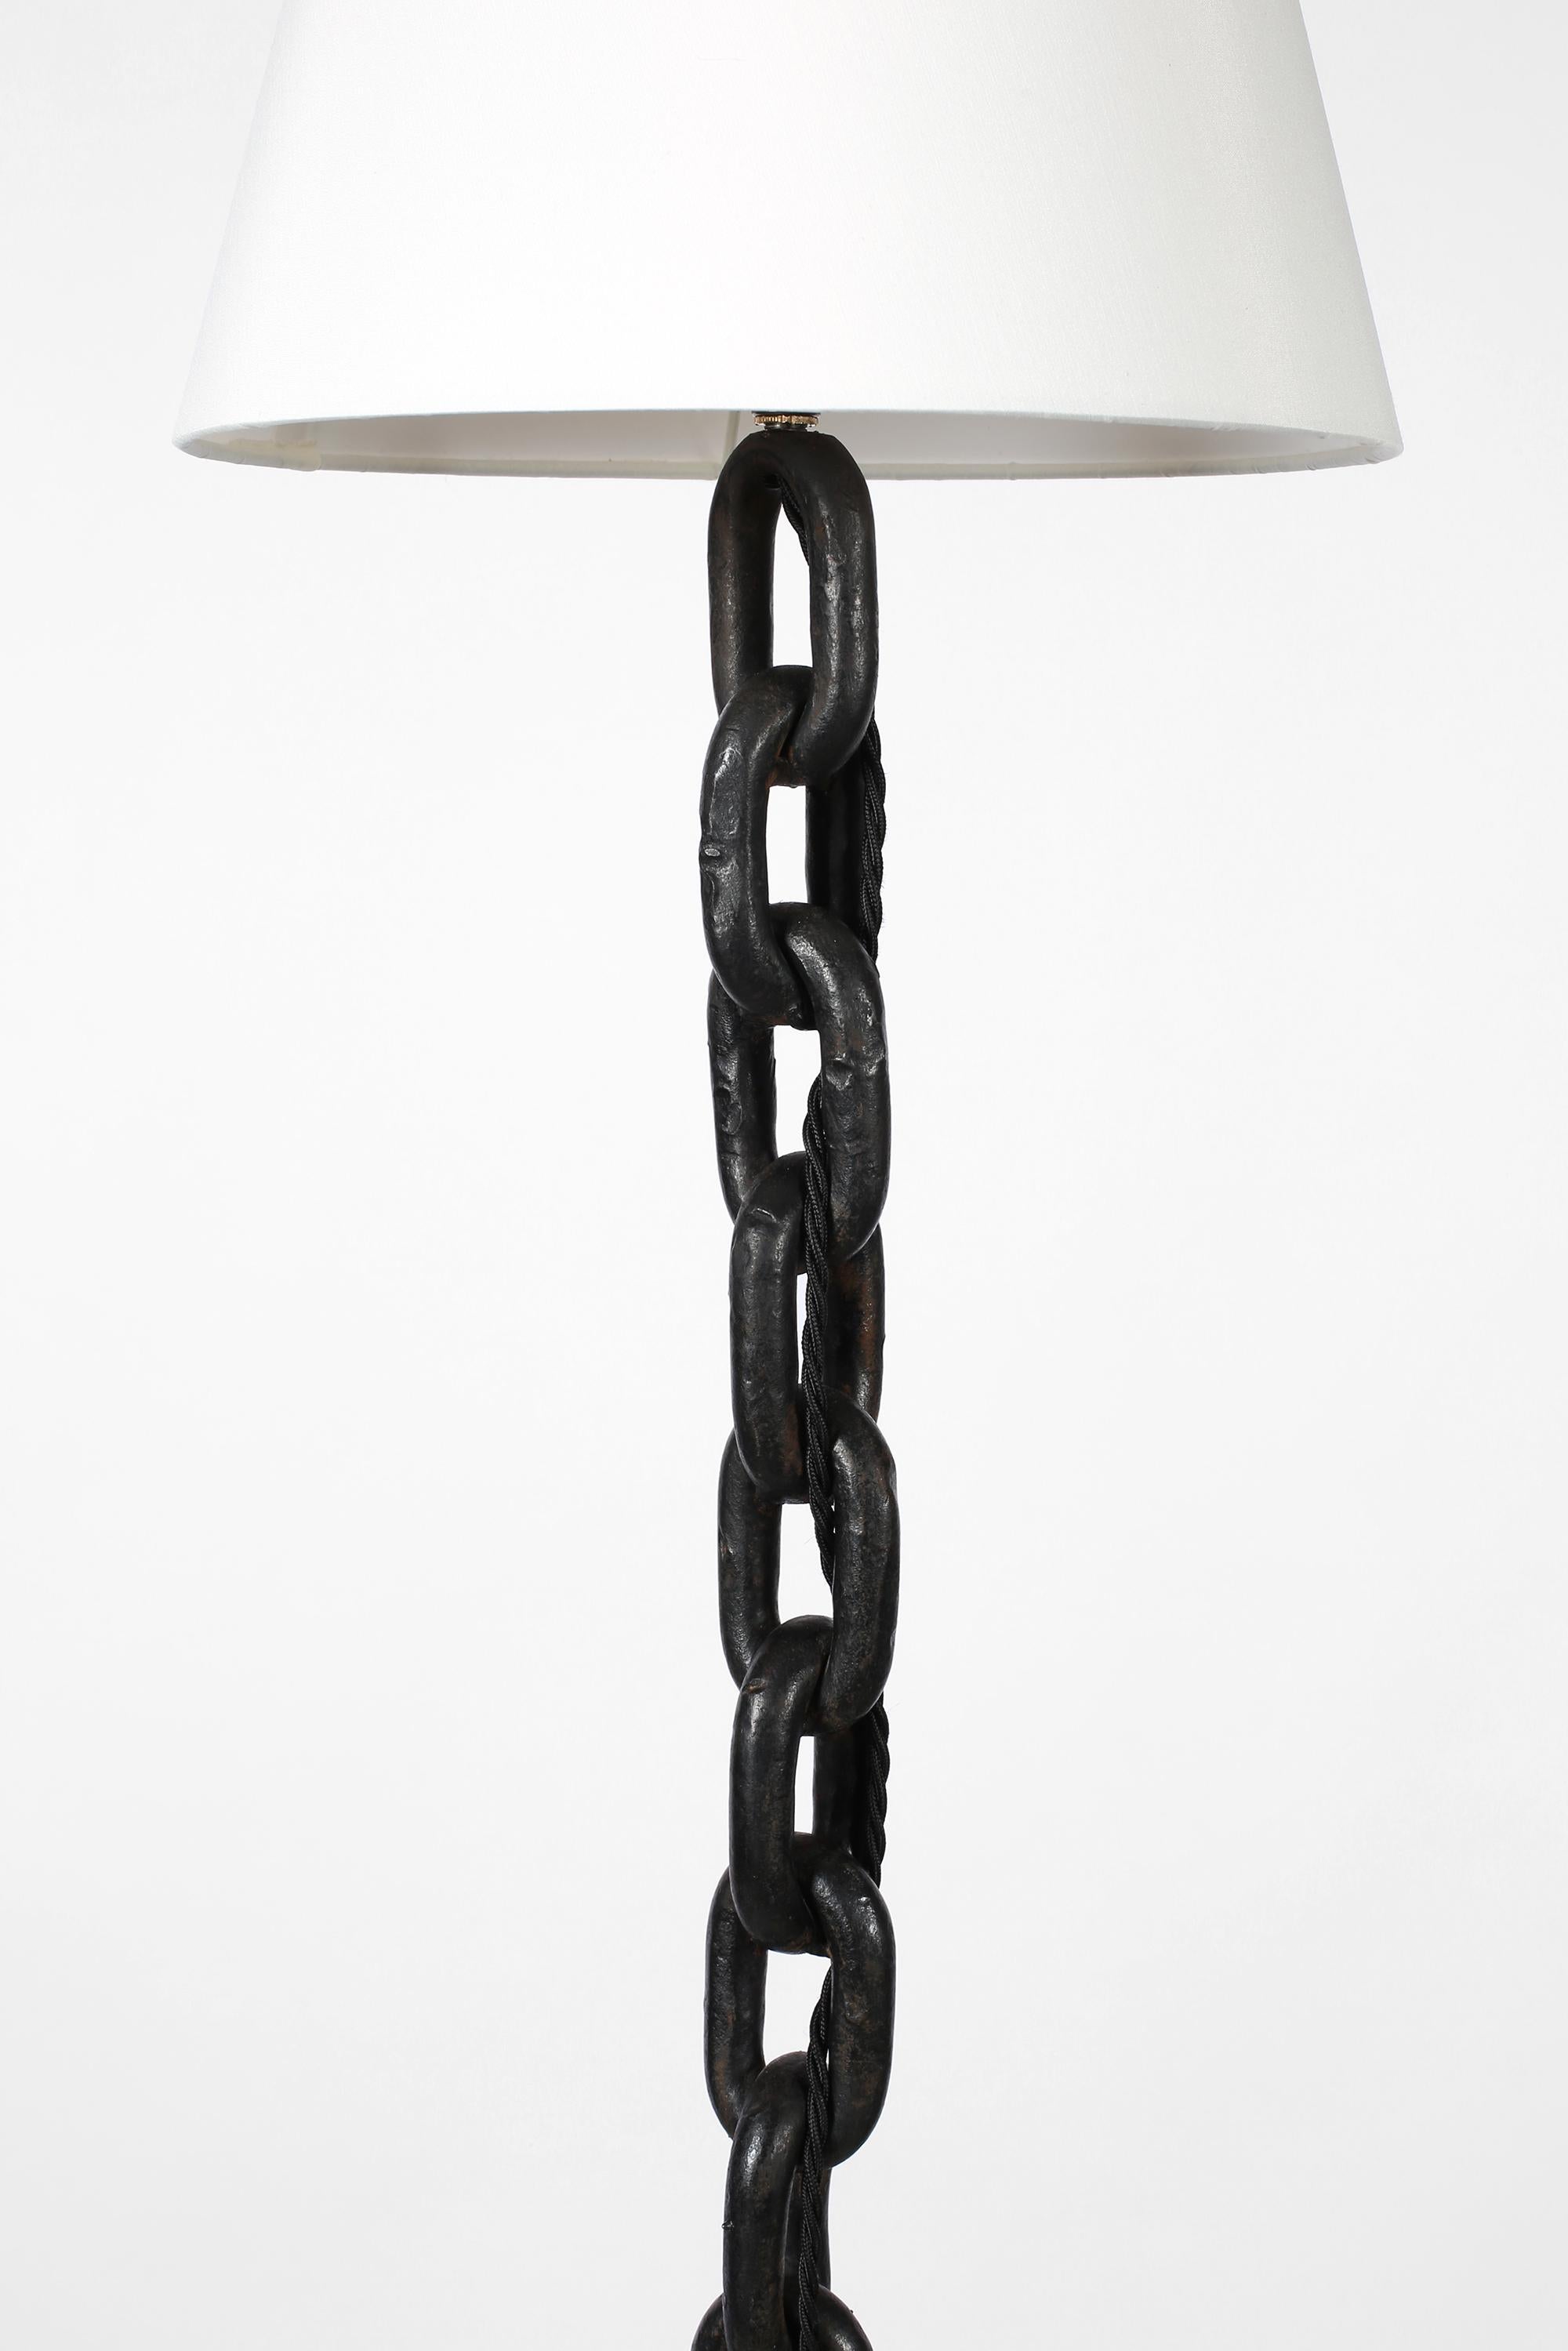 European French Midcentury Brutalist Iron Chain Link Table Lamp For Sale